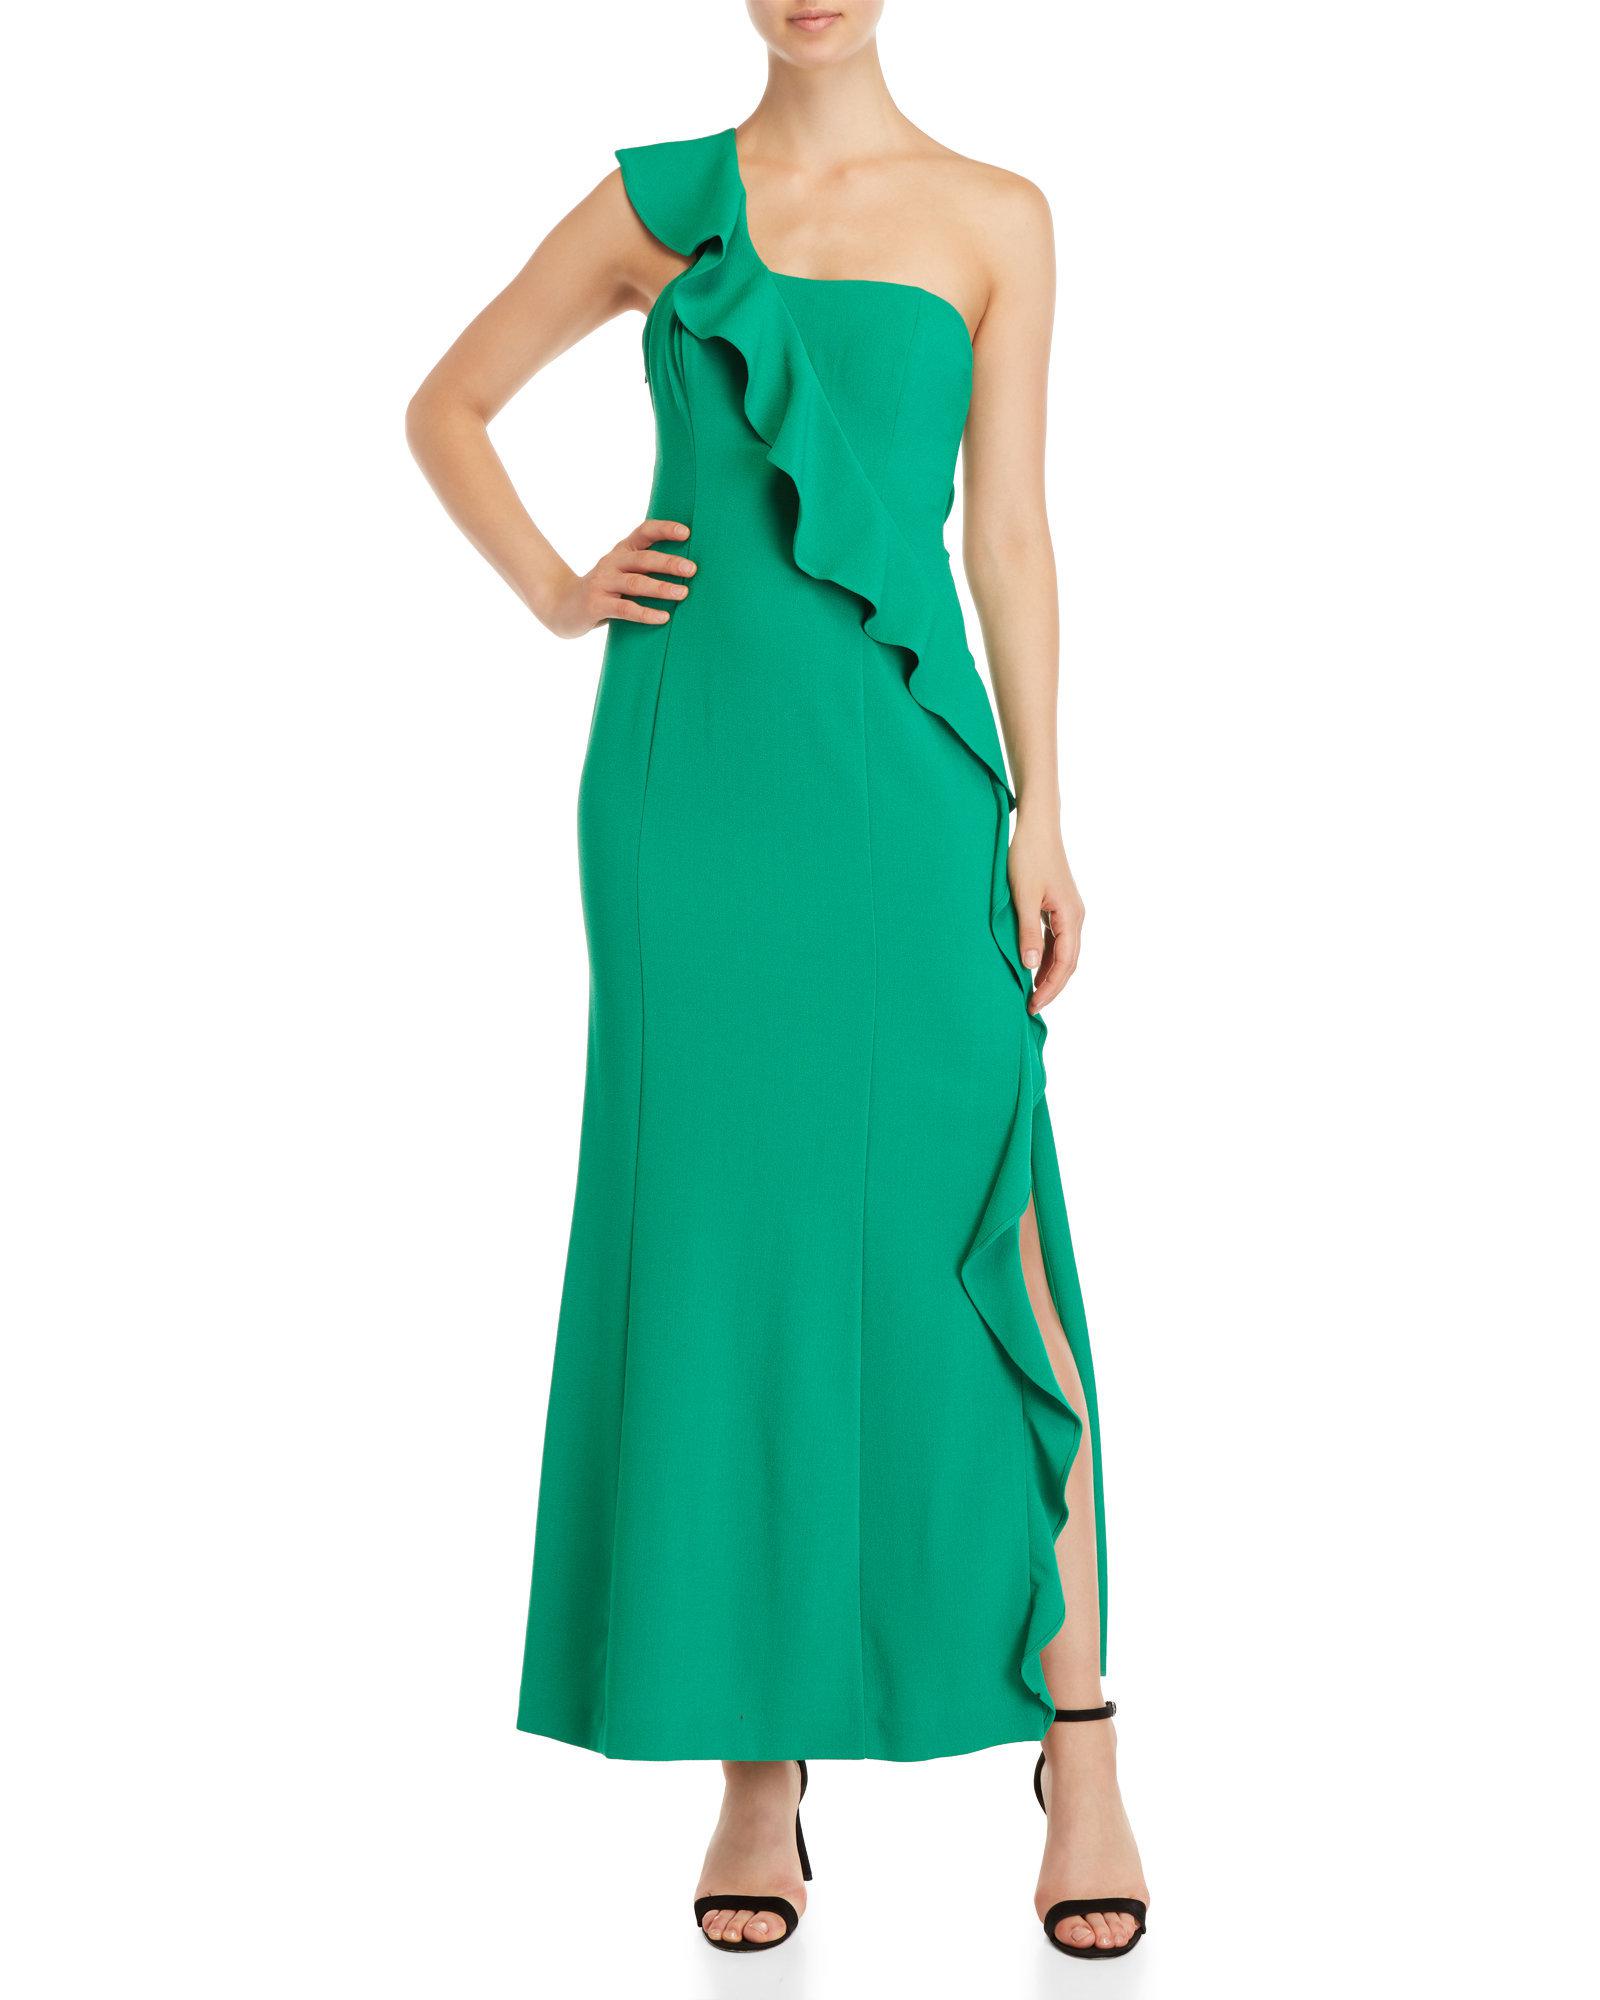 Lyst - Vince Camuto Petite Green One-shoulder Ruffle Gown in Green